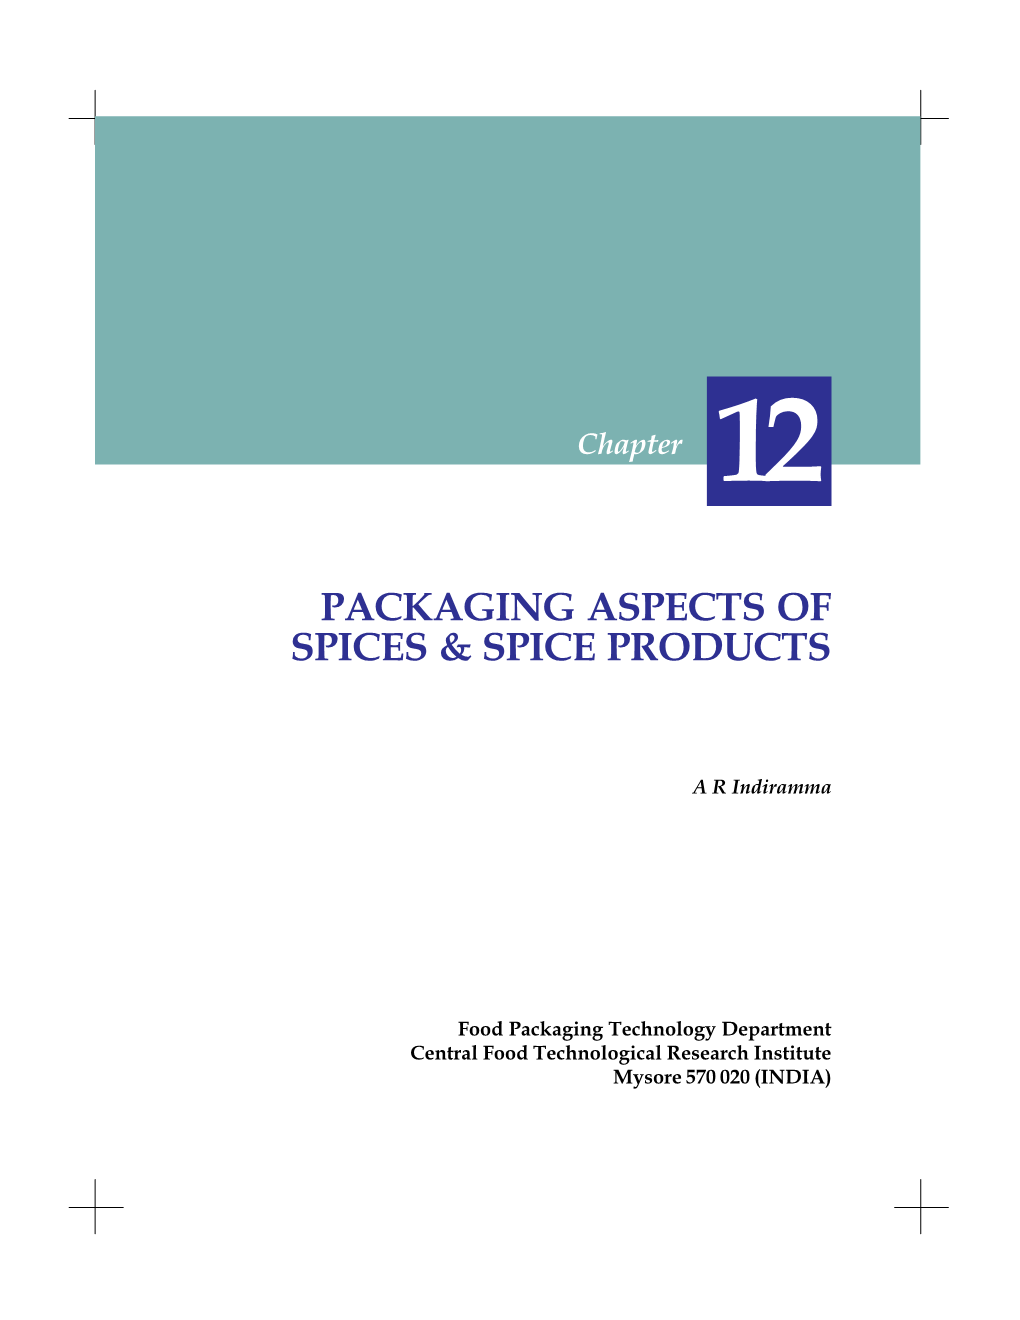 Packaging Aspects of Spices & Spice Products